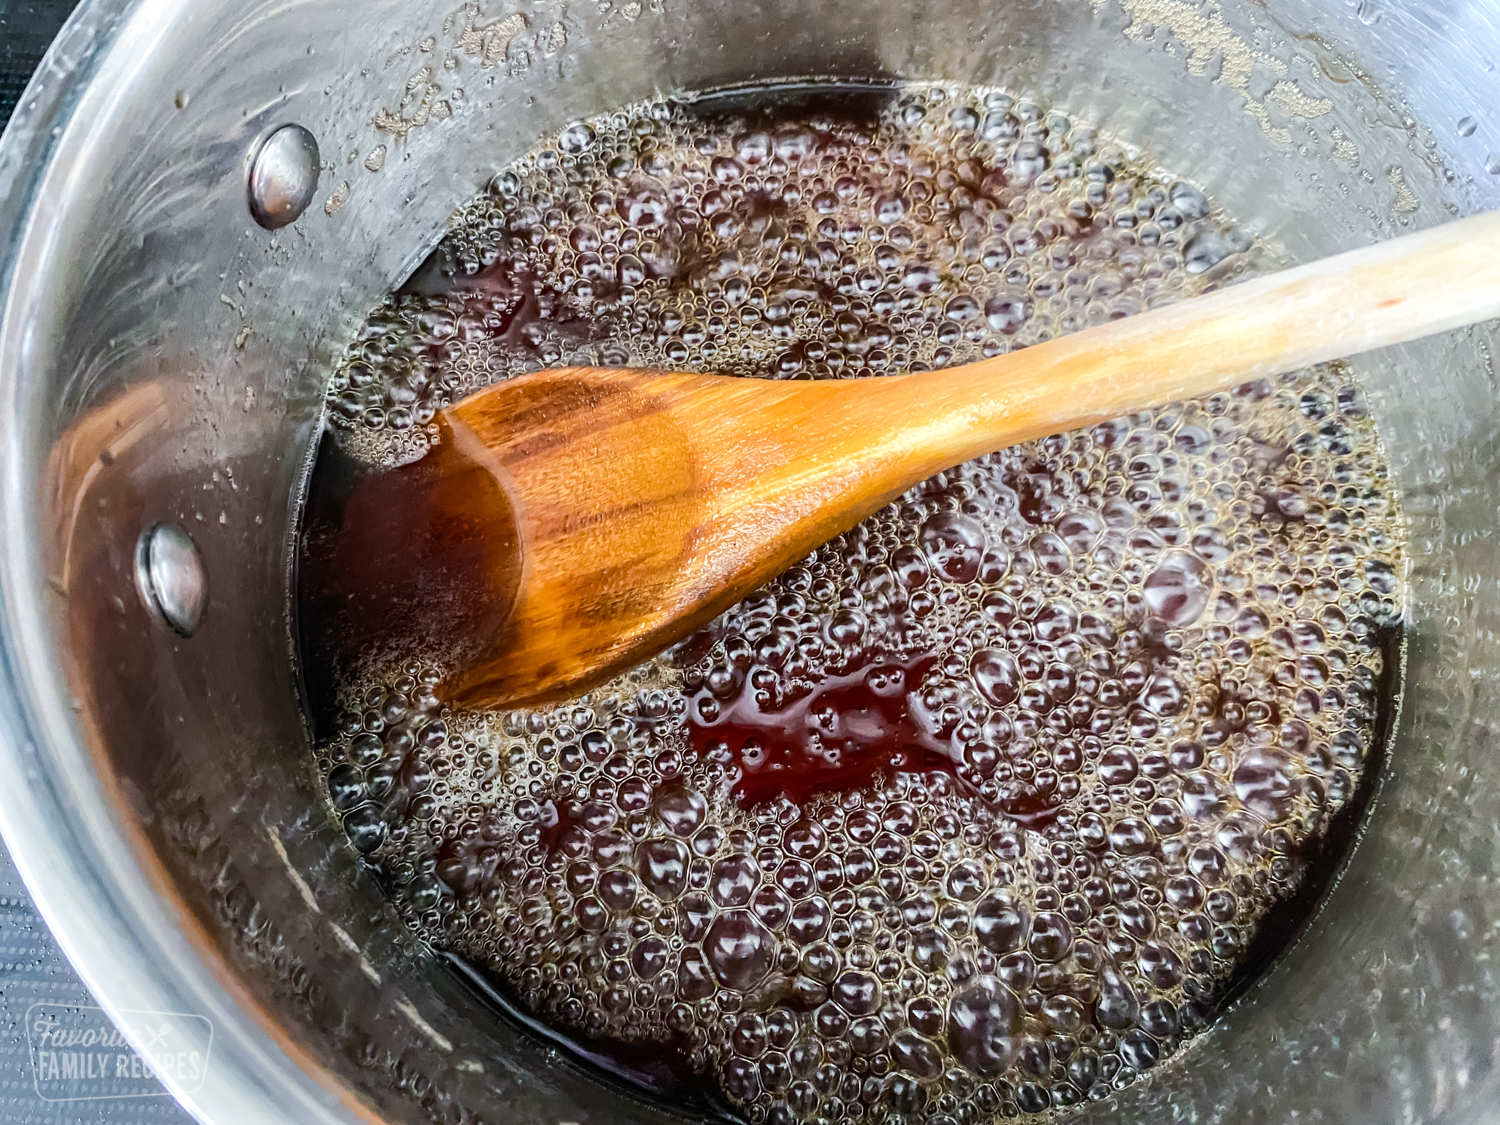 Brown sugar, sugar, maple extract and water that has been simmered in a saucepan to make maple syrup